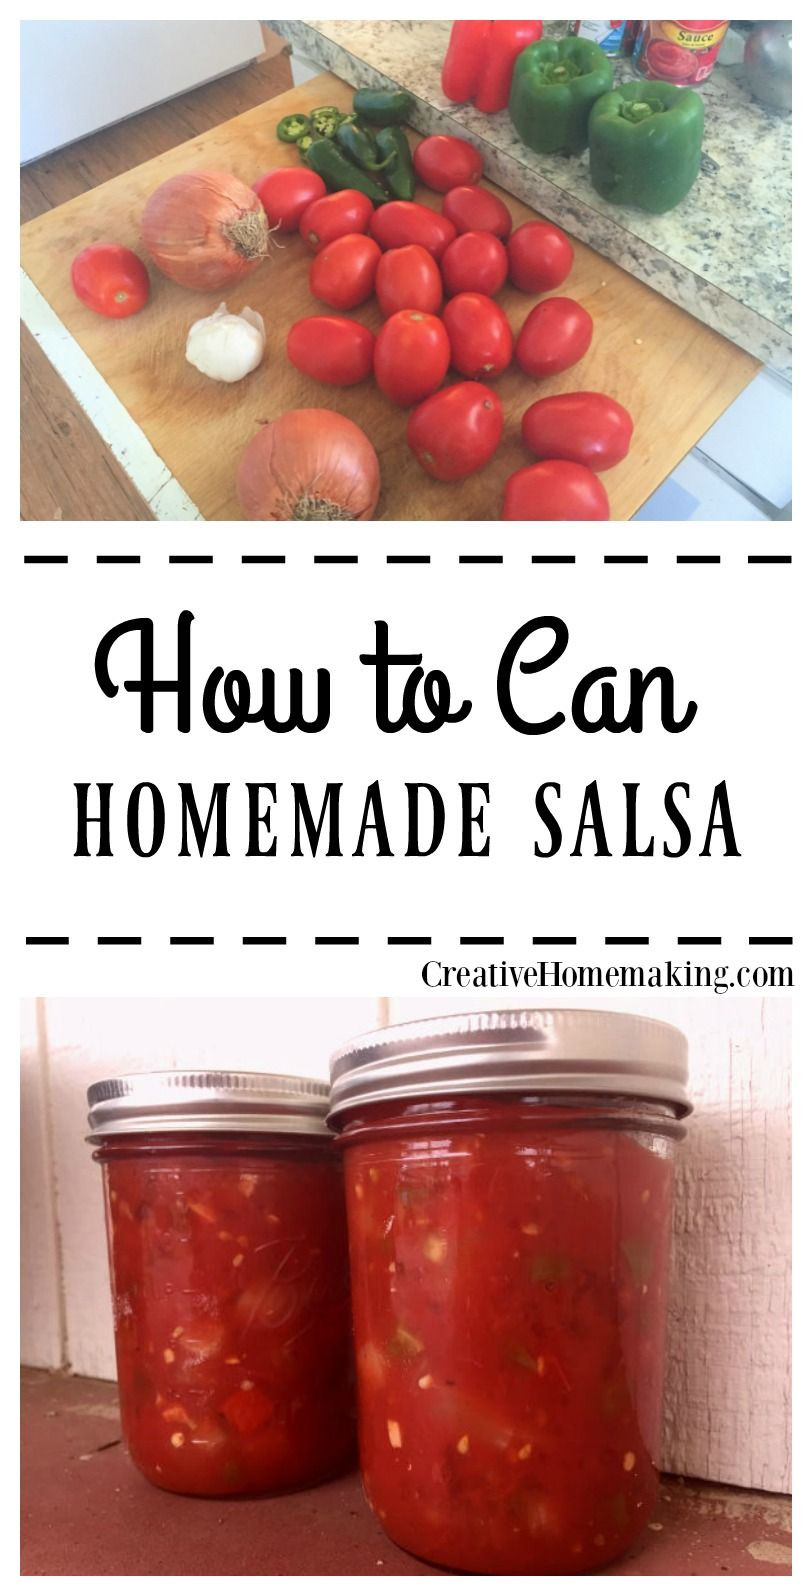 Hot Salsa Recipe For Canning
 Best Salsa Recipe for Canning